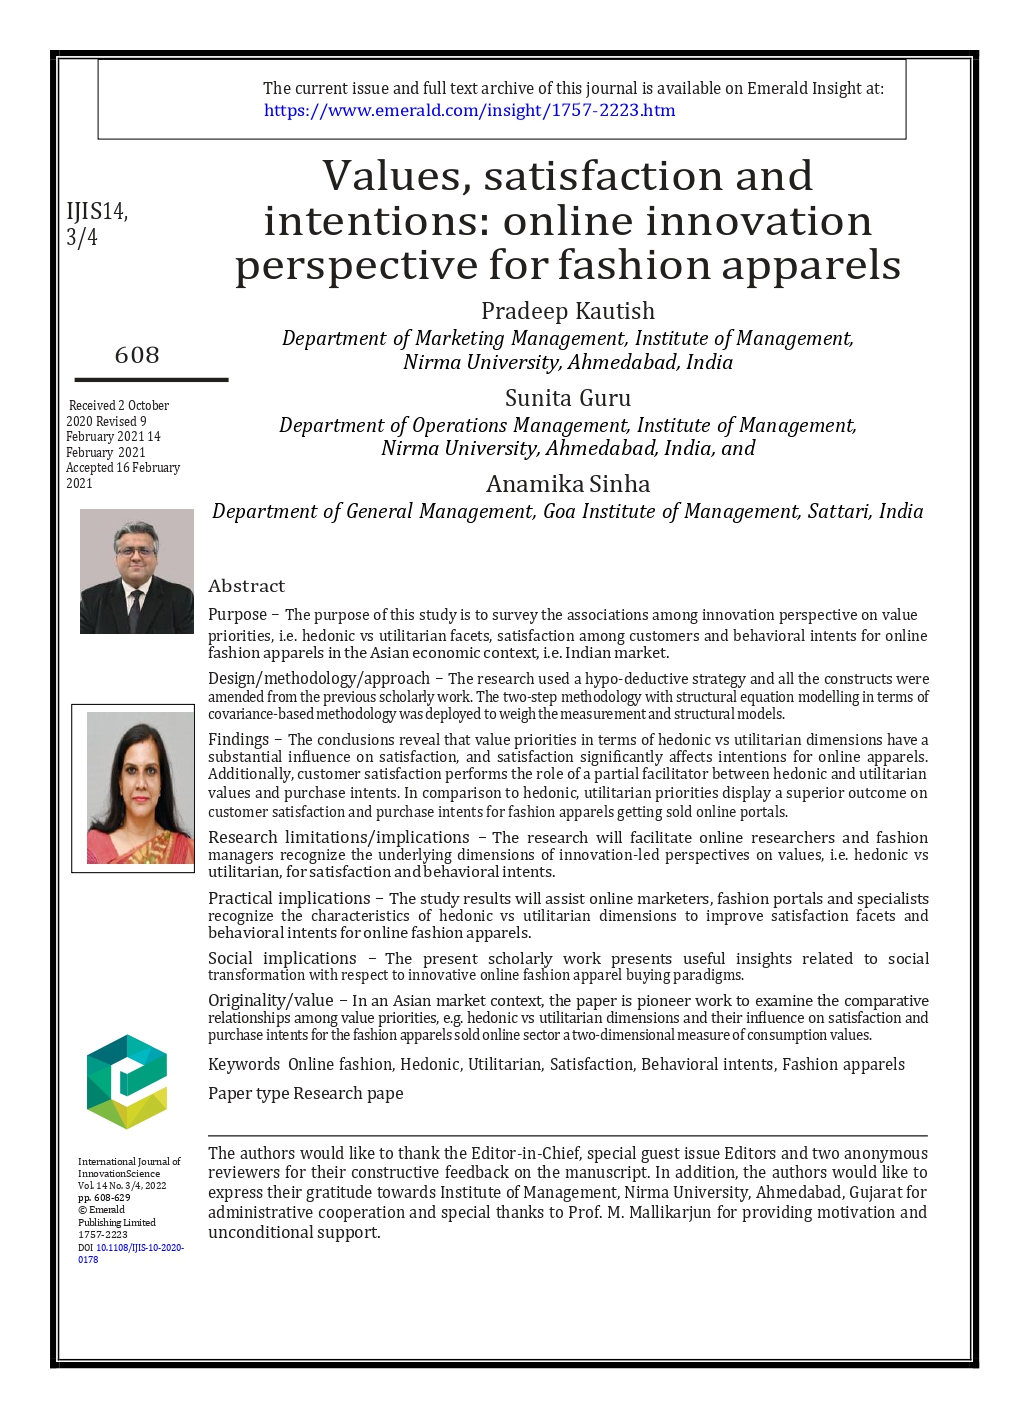 Values, satisfaction and intentions: online innovation perspective for fashion apparels